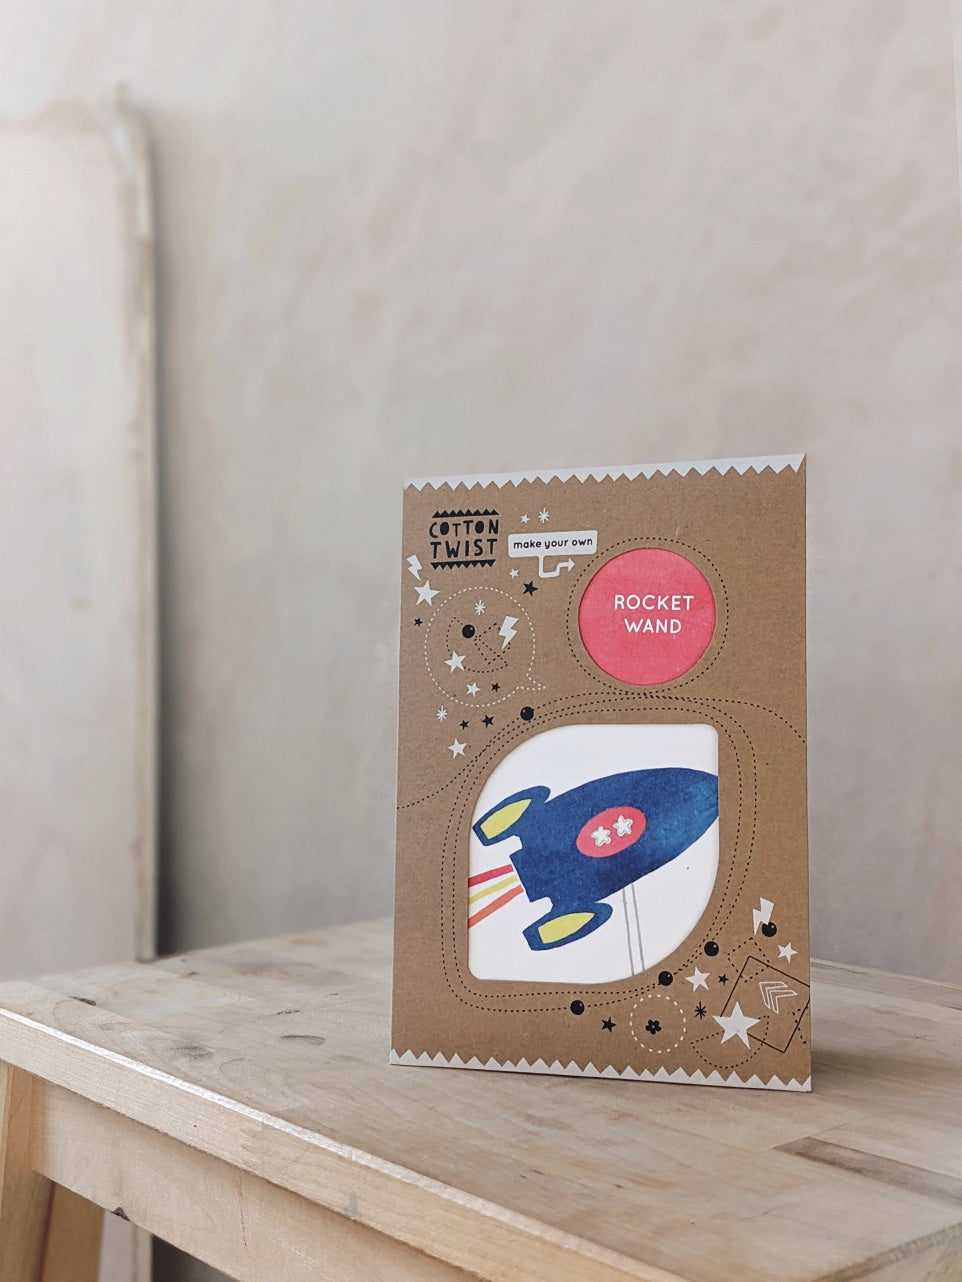 Space gift box, age 2-4